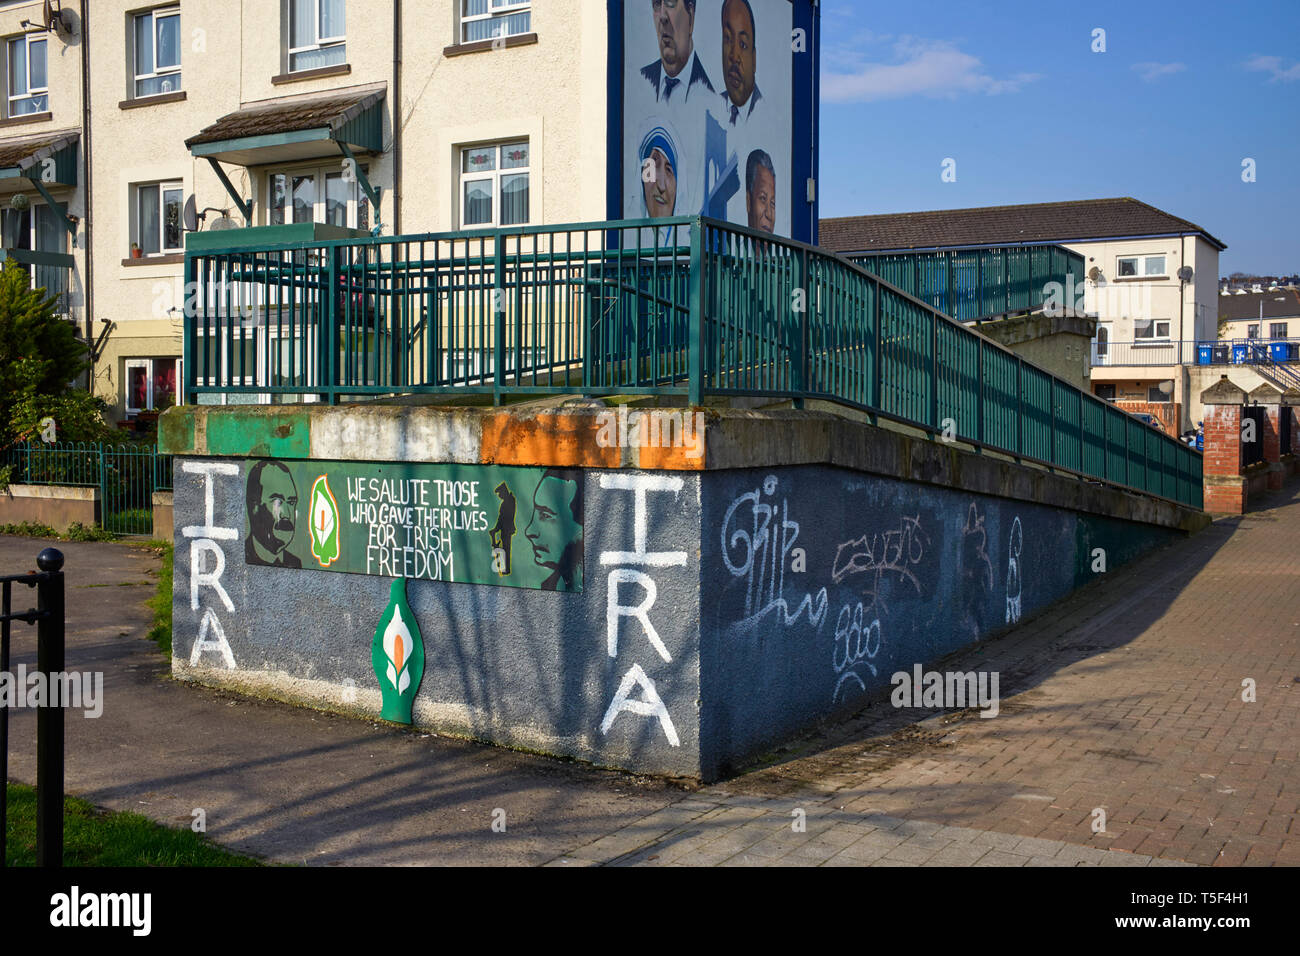 Political slogan in the Bogside area of Derry / Londonderry, saluting those who gave their lives for Irish freedom Stock Photo